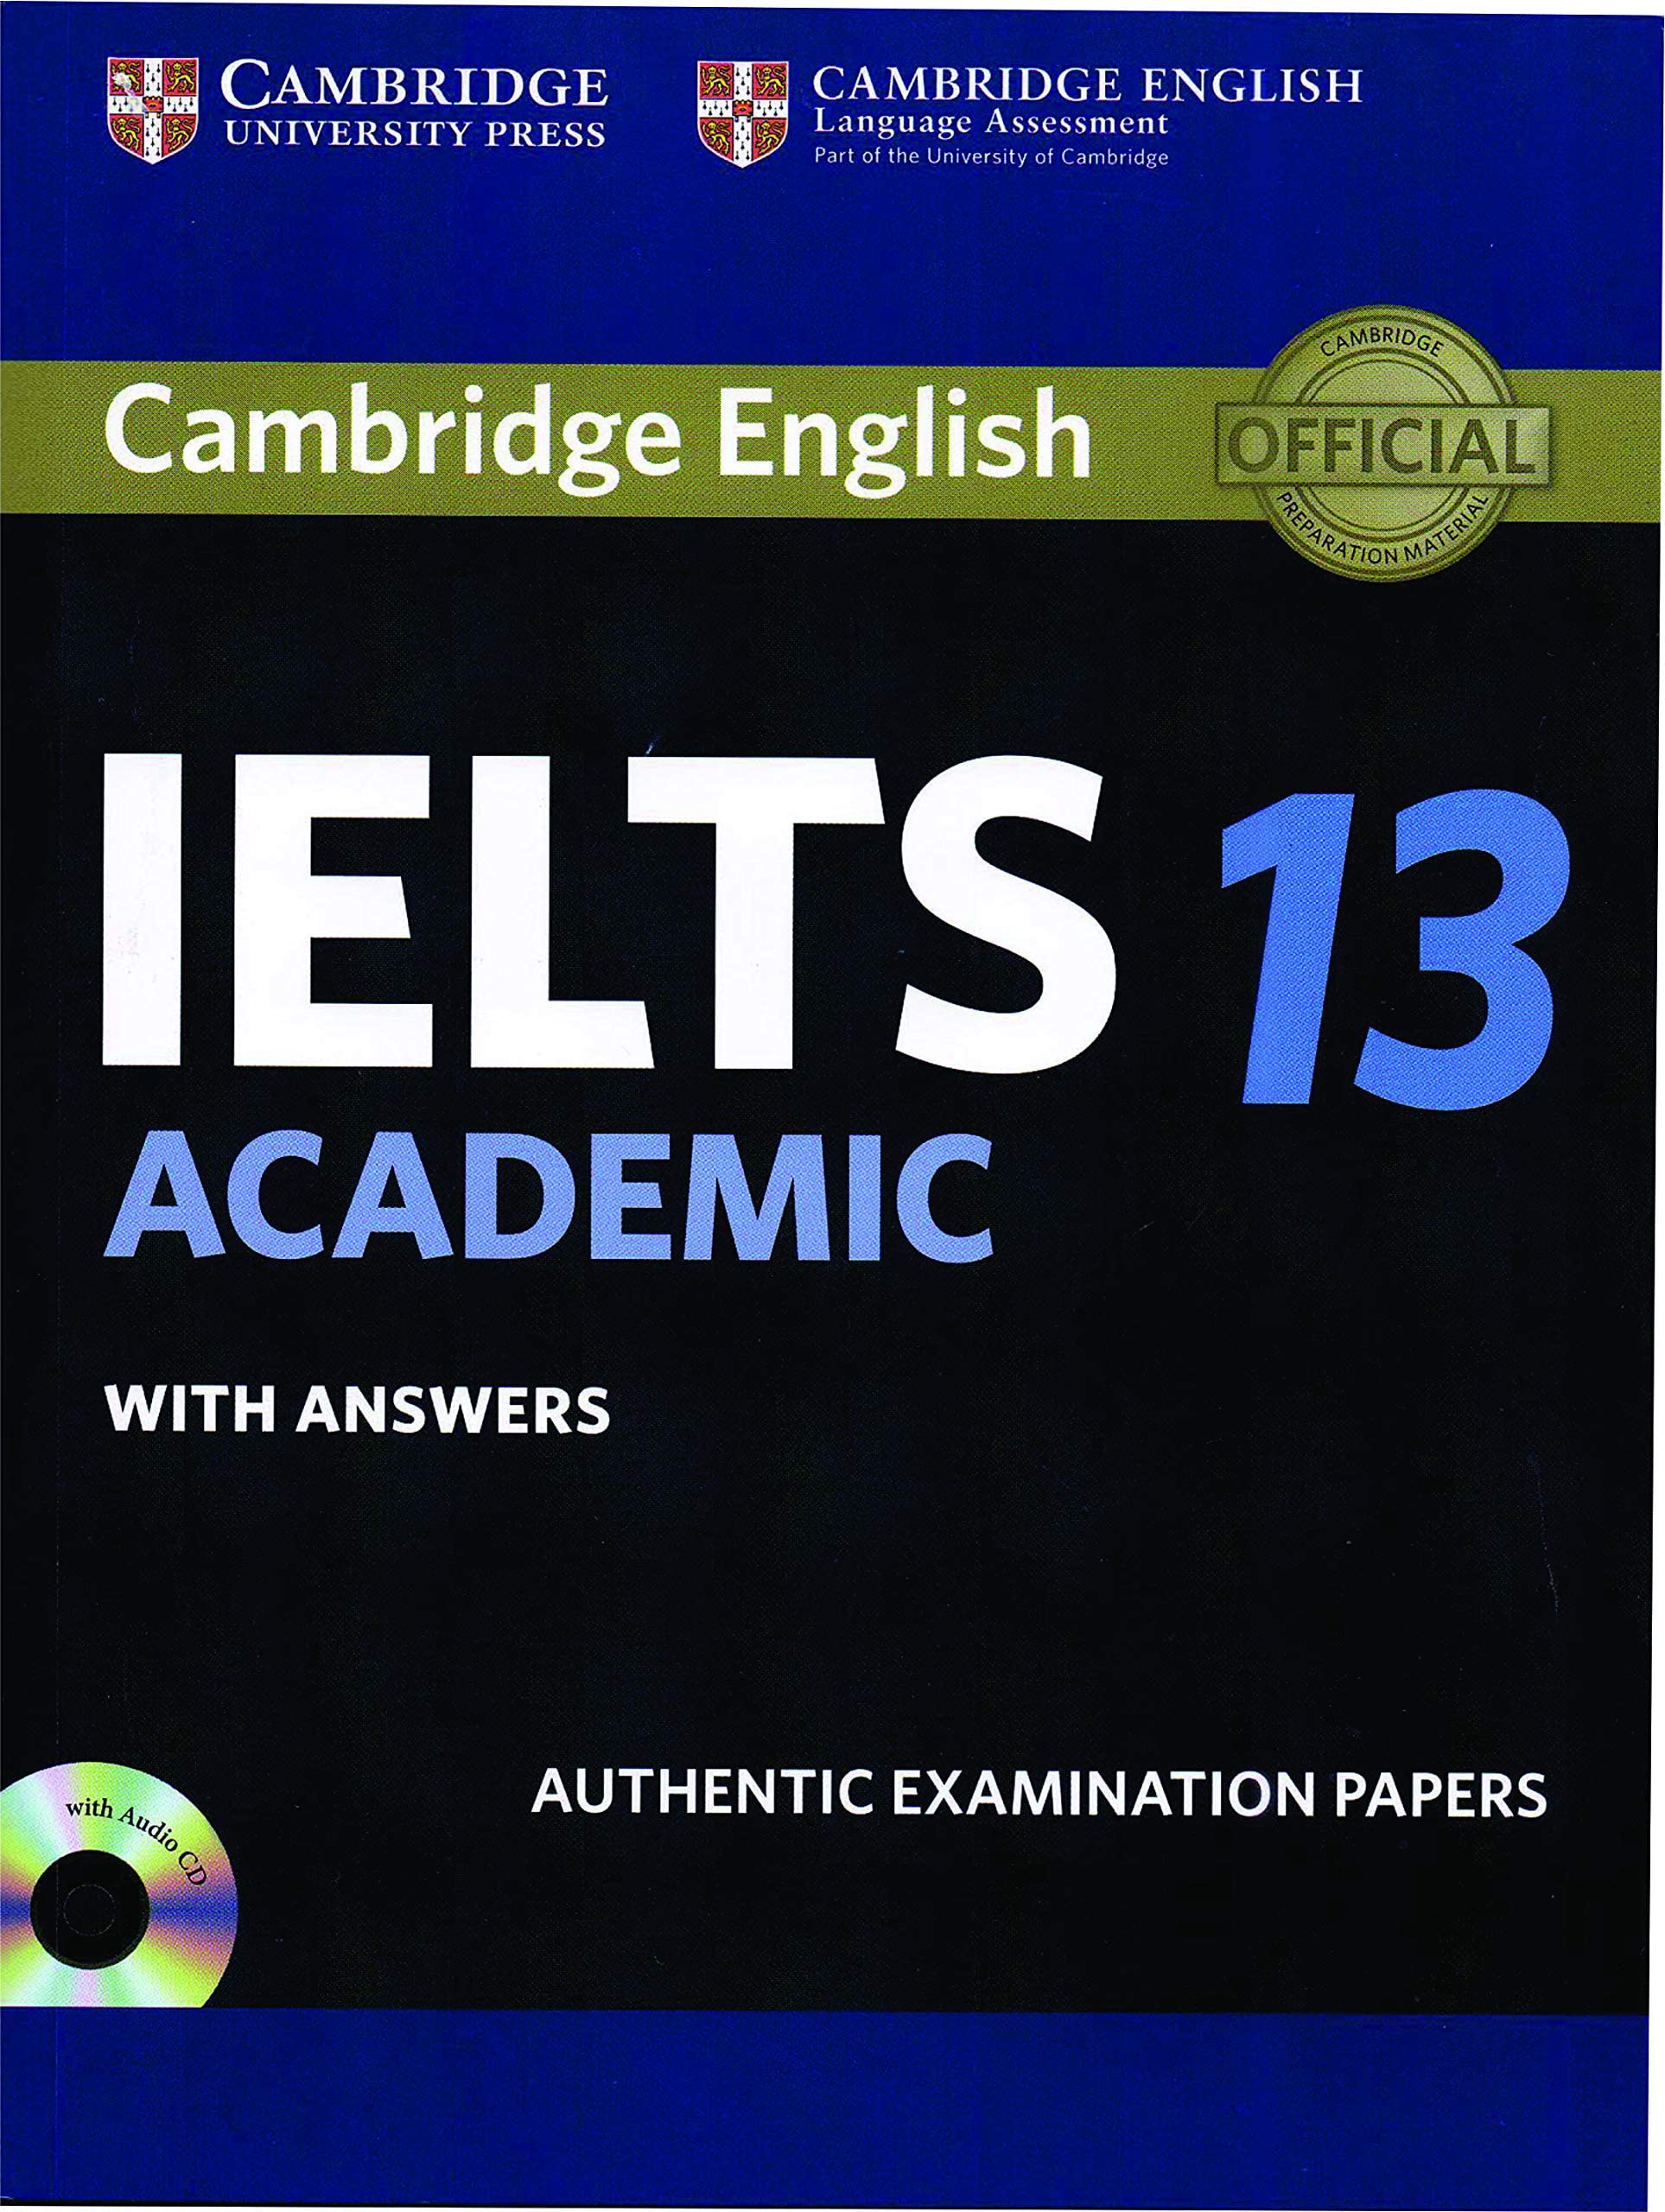 IELTS 17 General Training Student's Book with Answers with Audio 